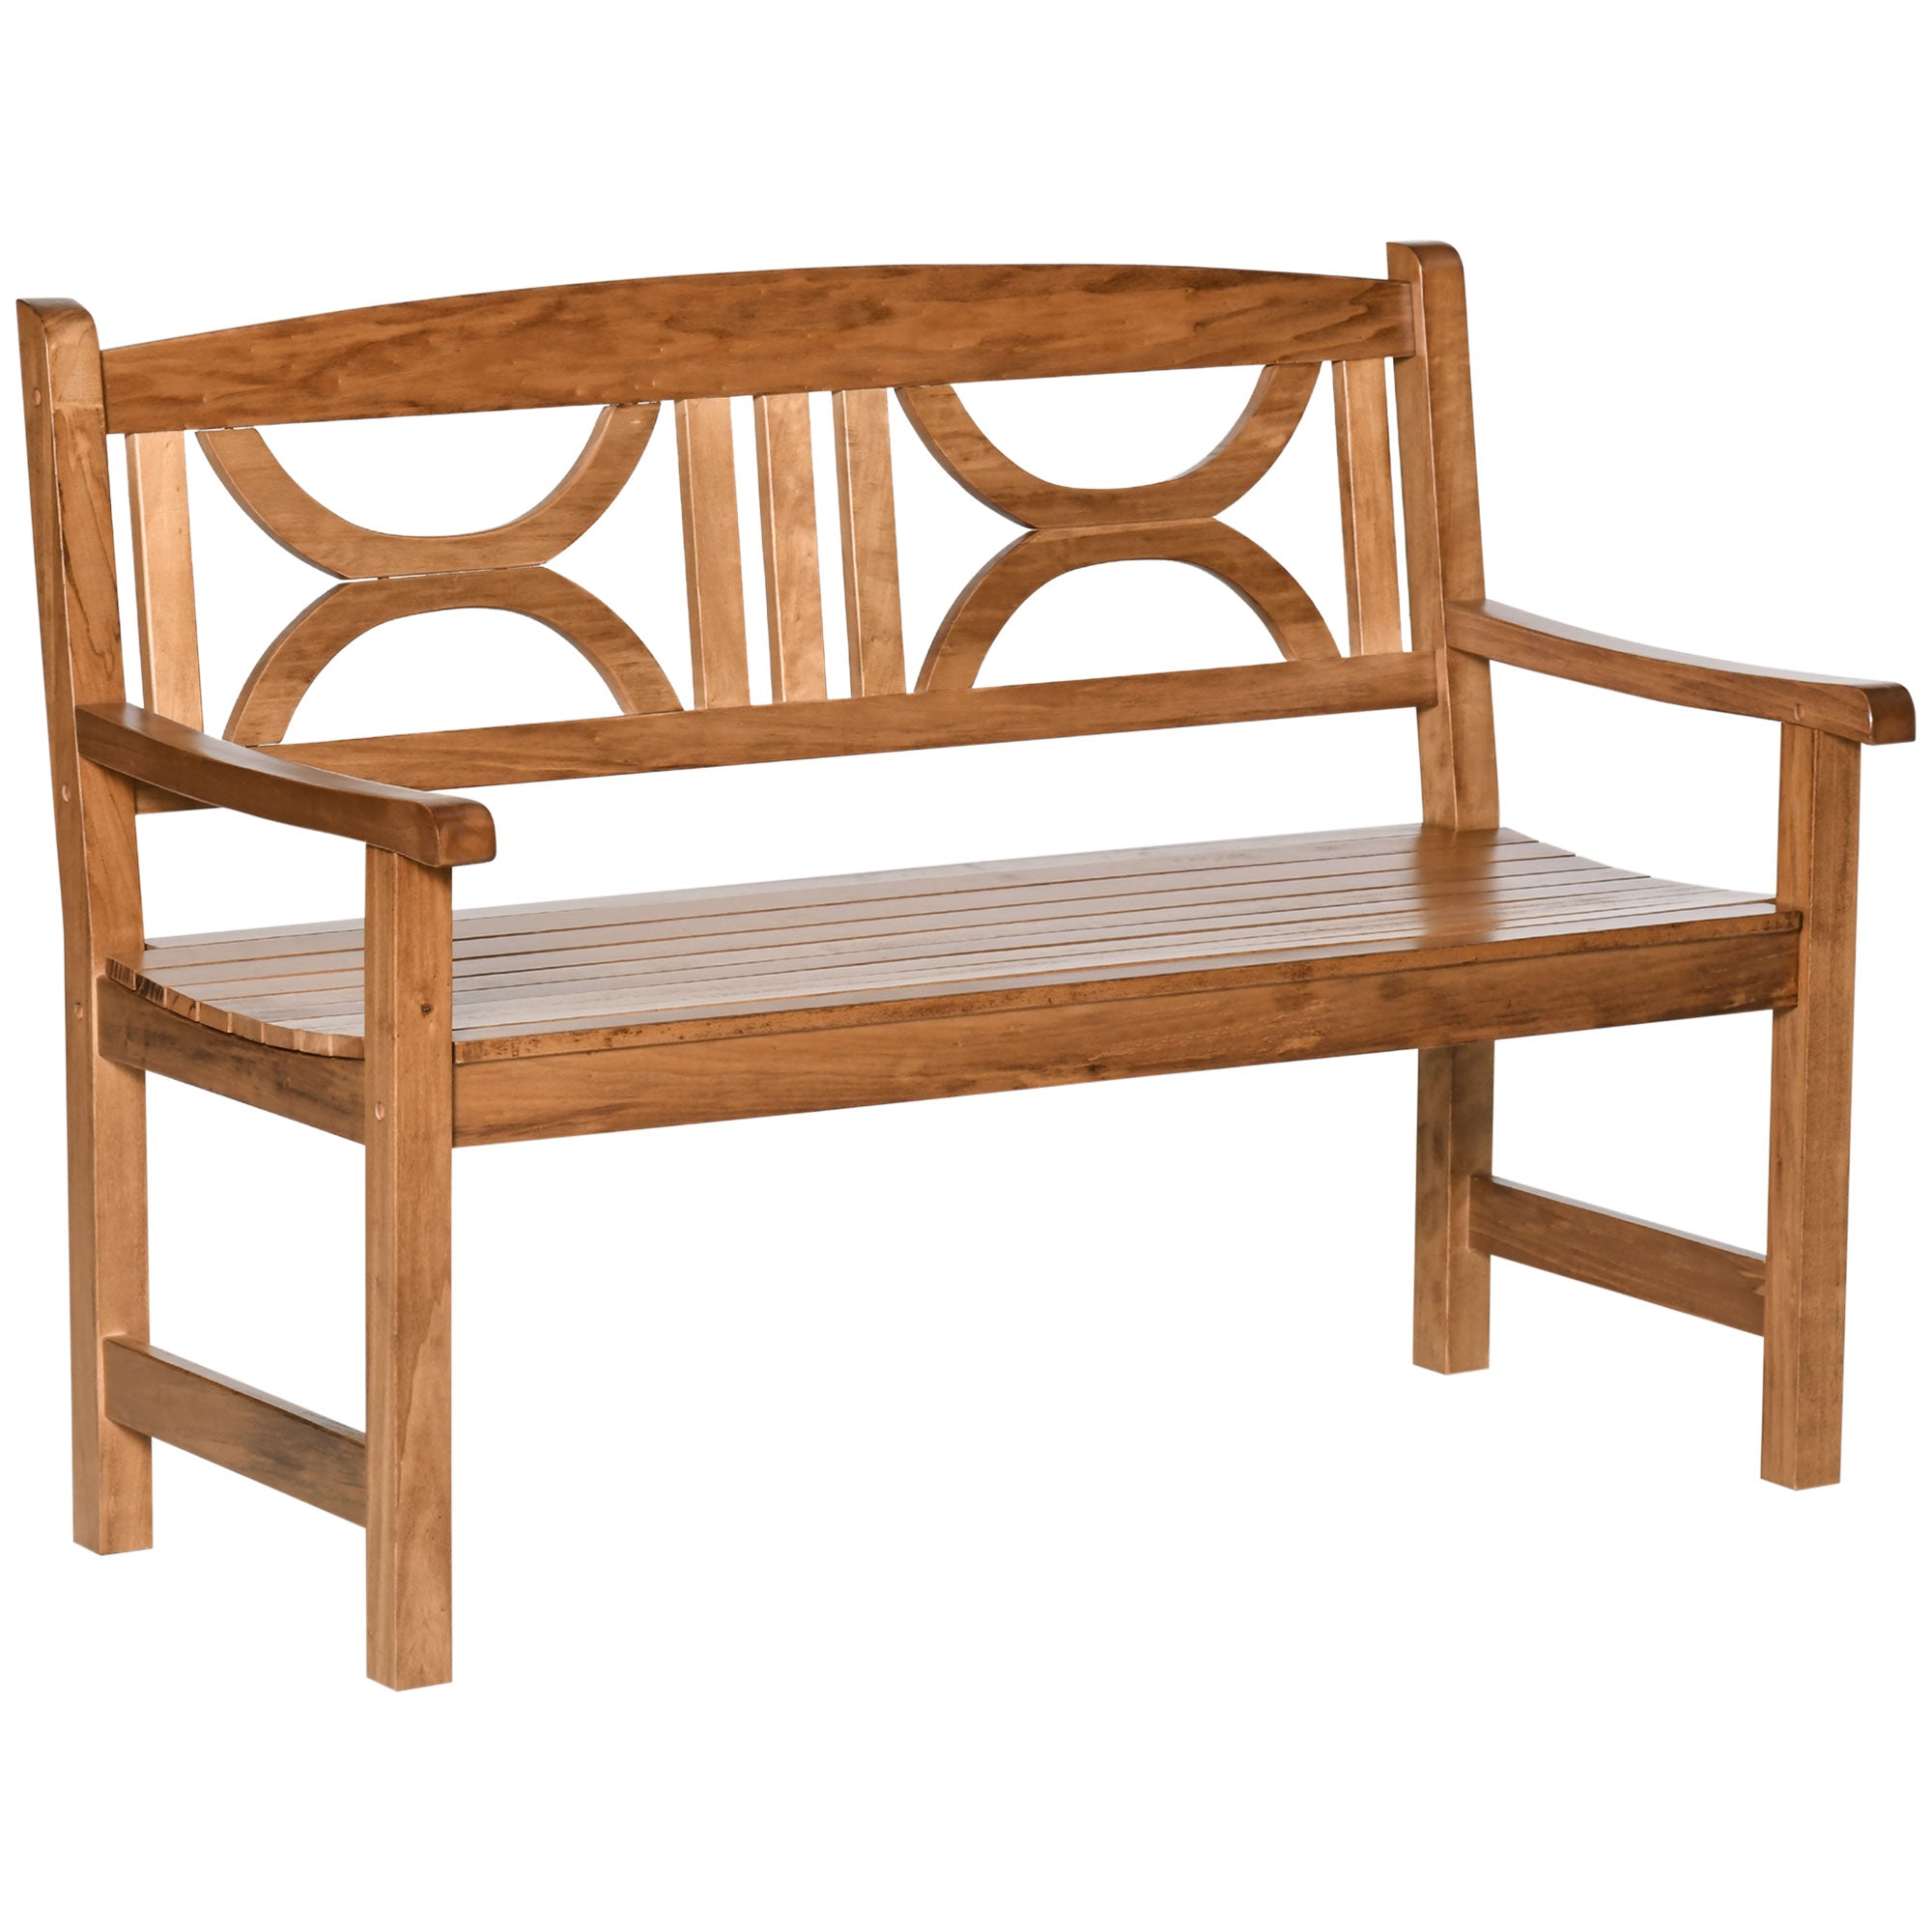 2-Seater Chair, Wooden Garden Bench, Outdoor Patio Loveseat for Yard, Lawn, Porch, Natural-0